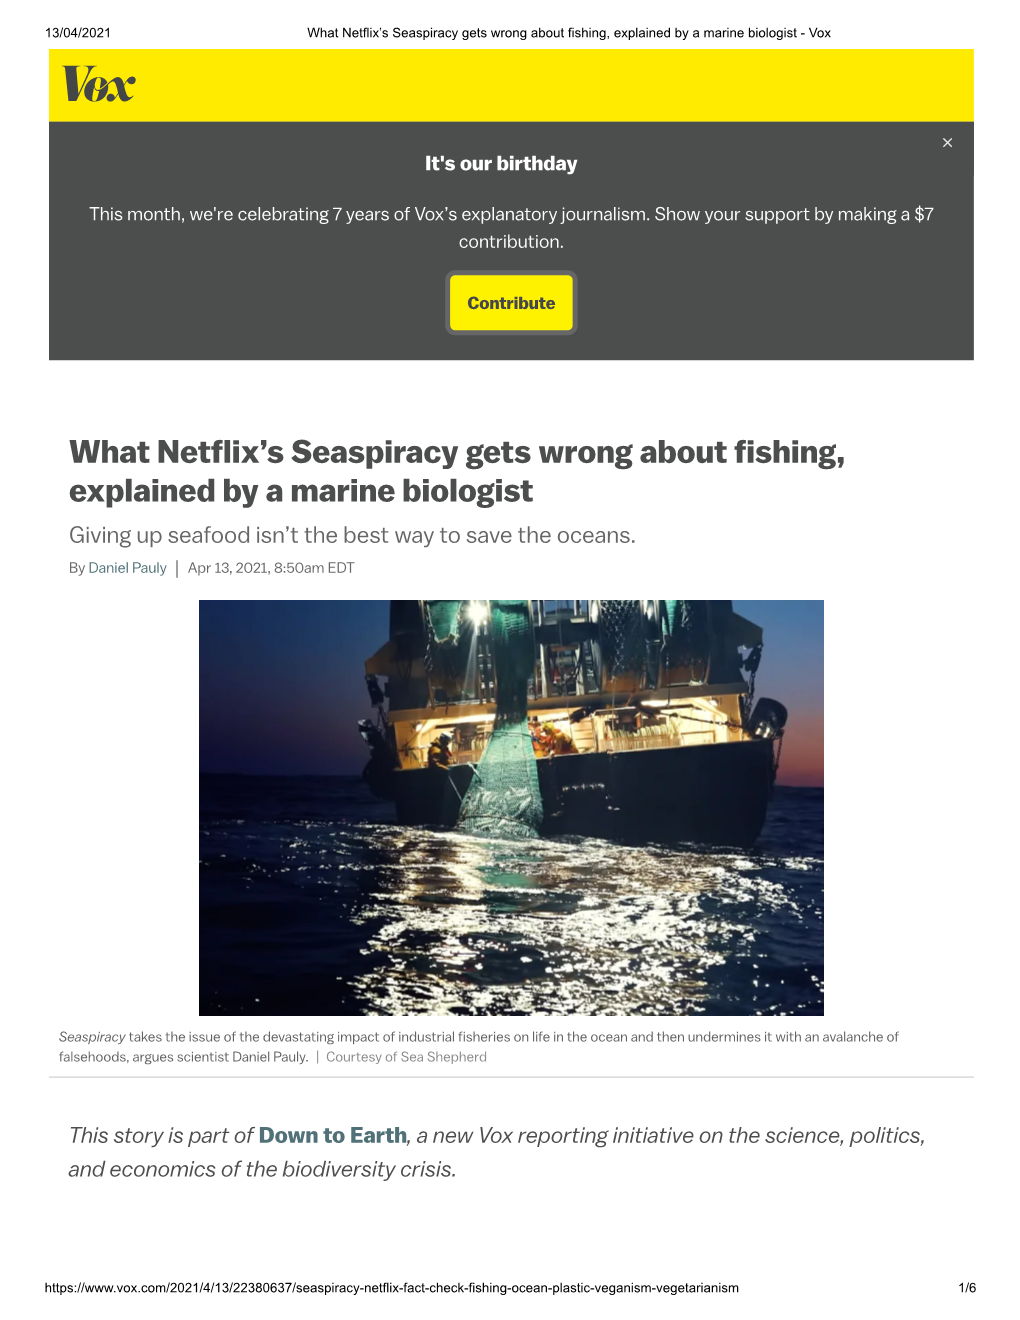 What Netflix's Seaspiracy Gets Wrong About Fishing, Explained by A